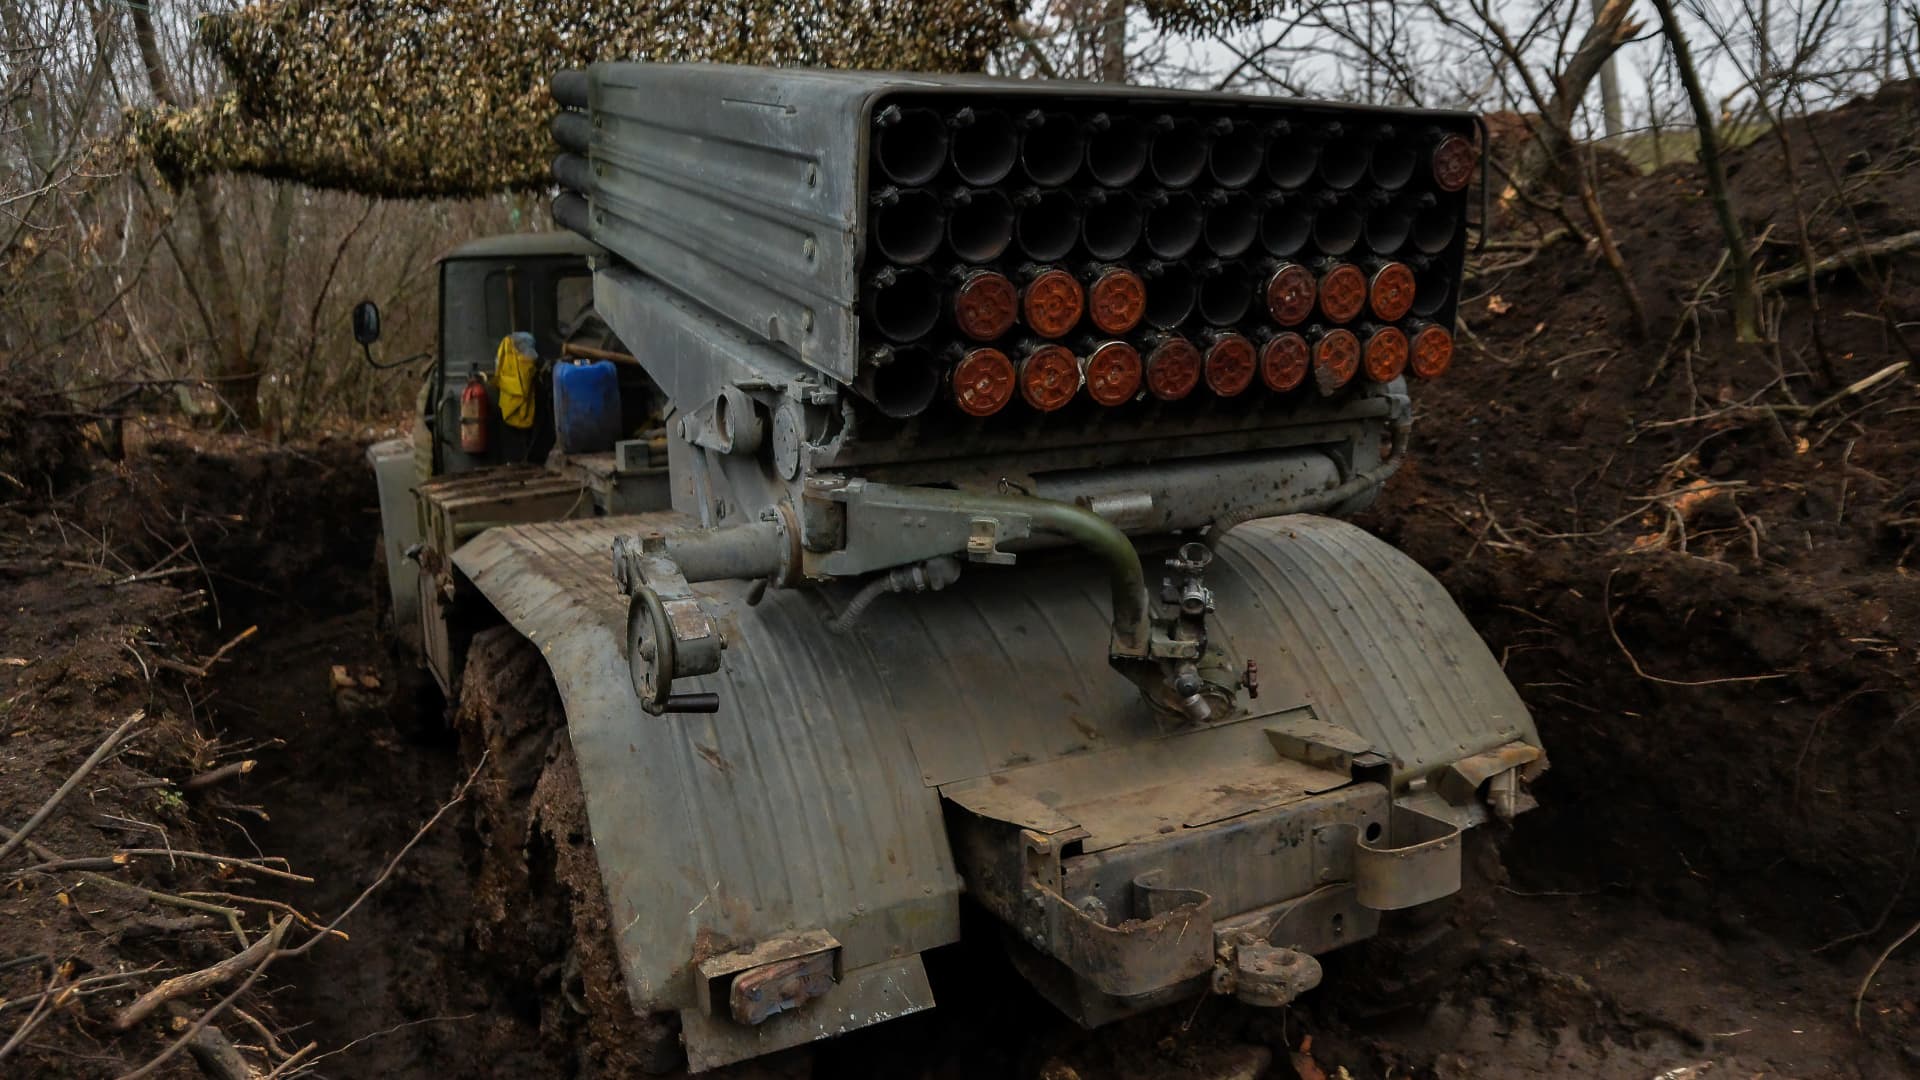 A Ukrainian multiple-launch rocket system is hiding among the trees near Soledar as the fighting in the Donbas region continues.